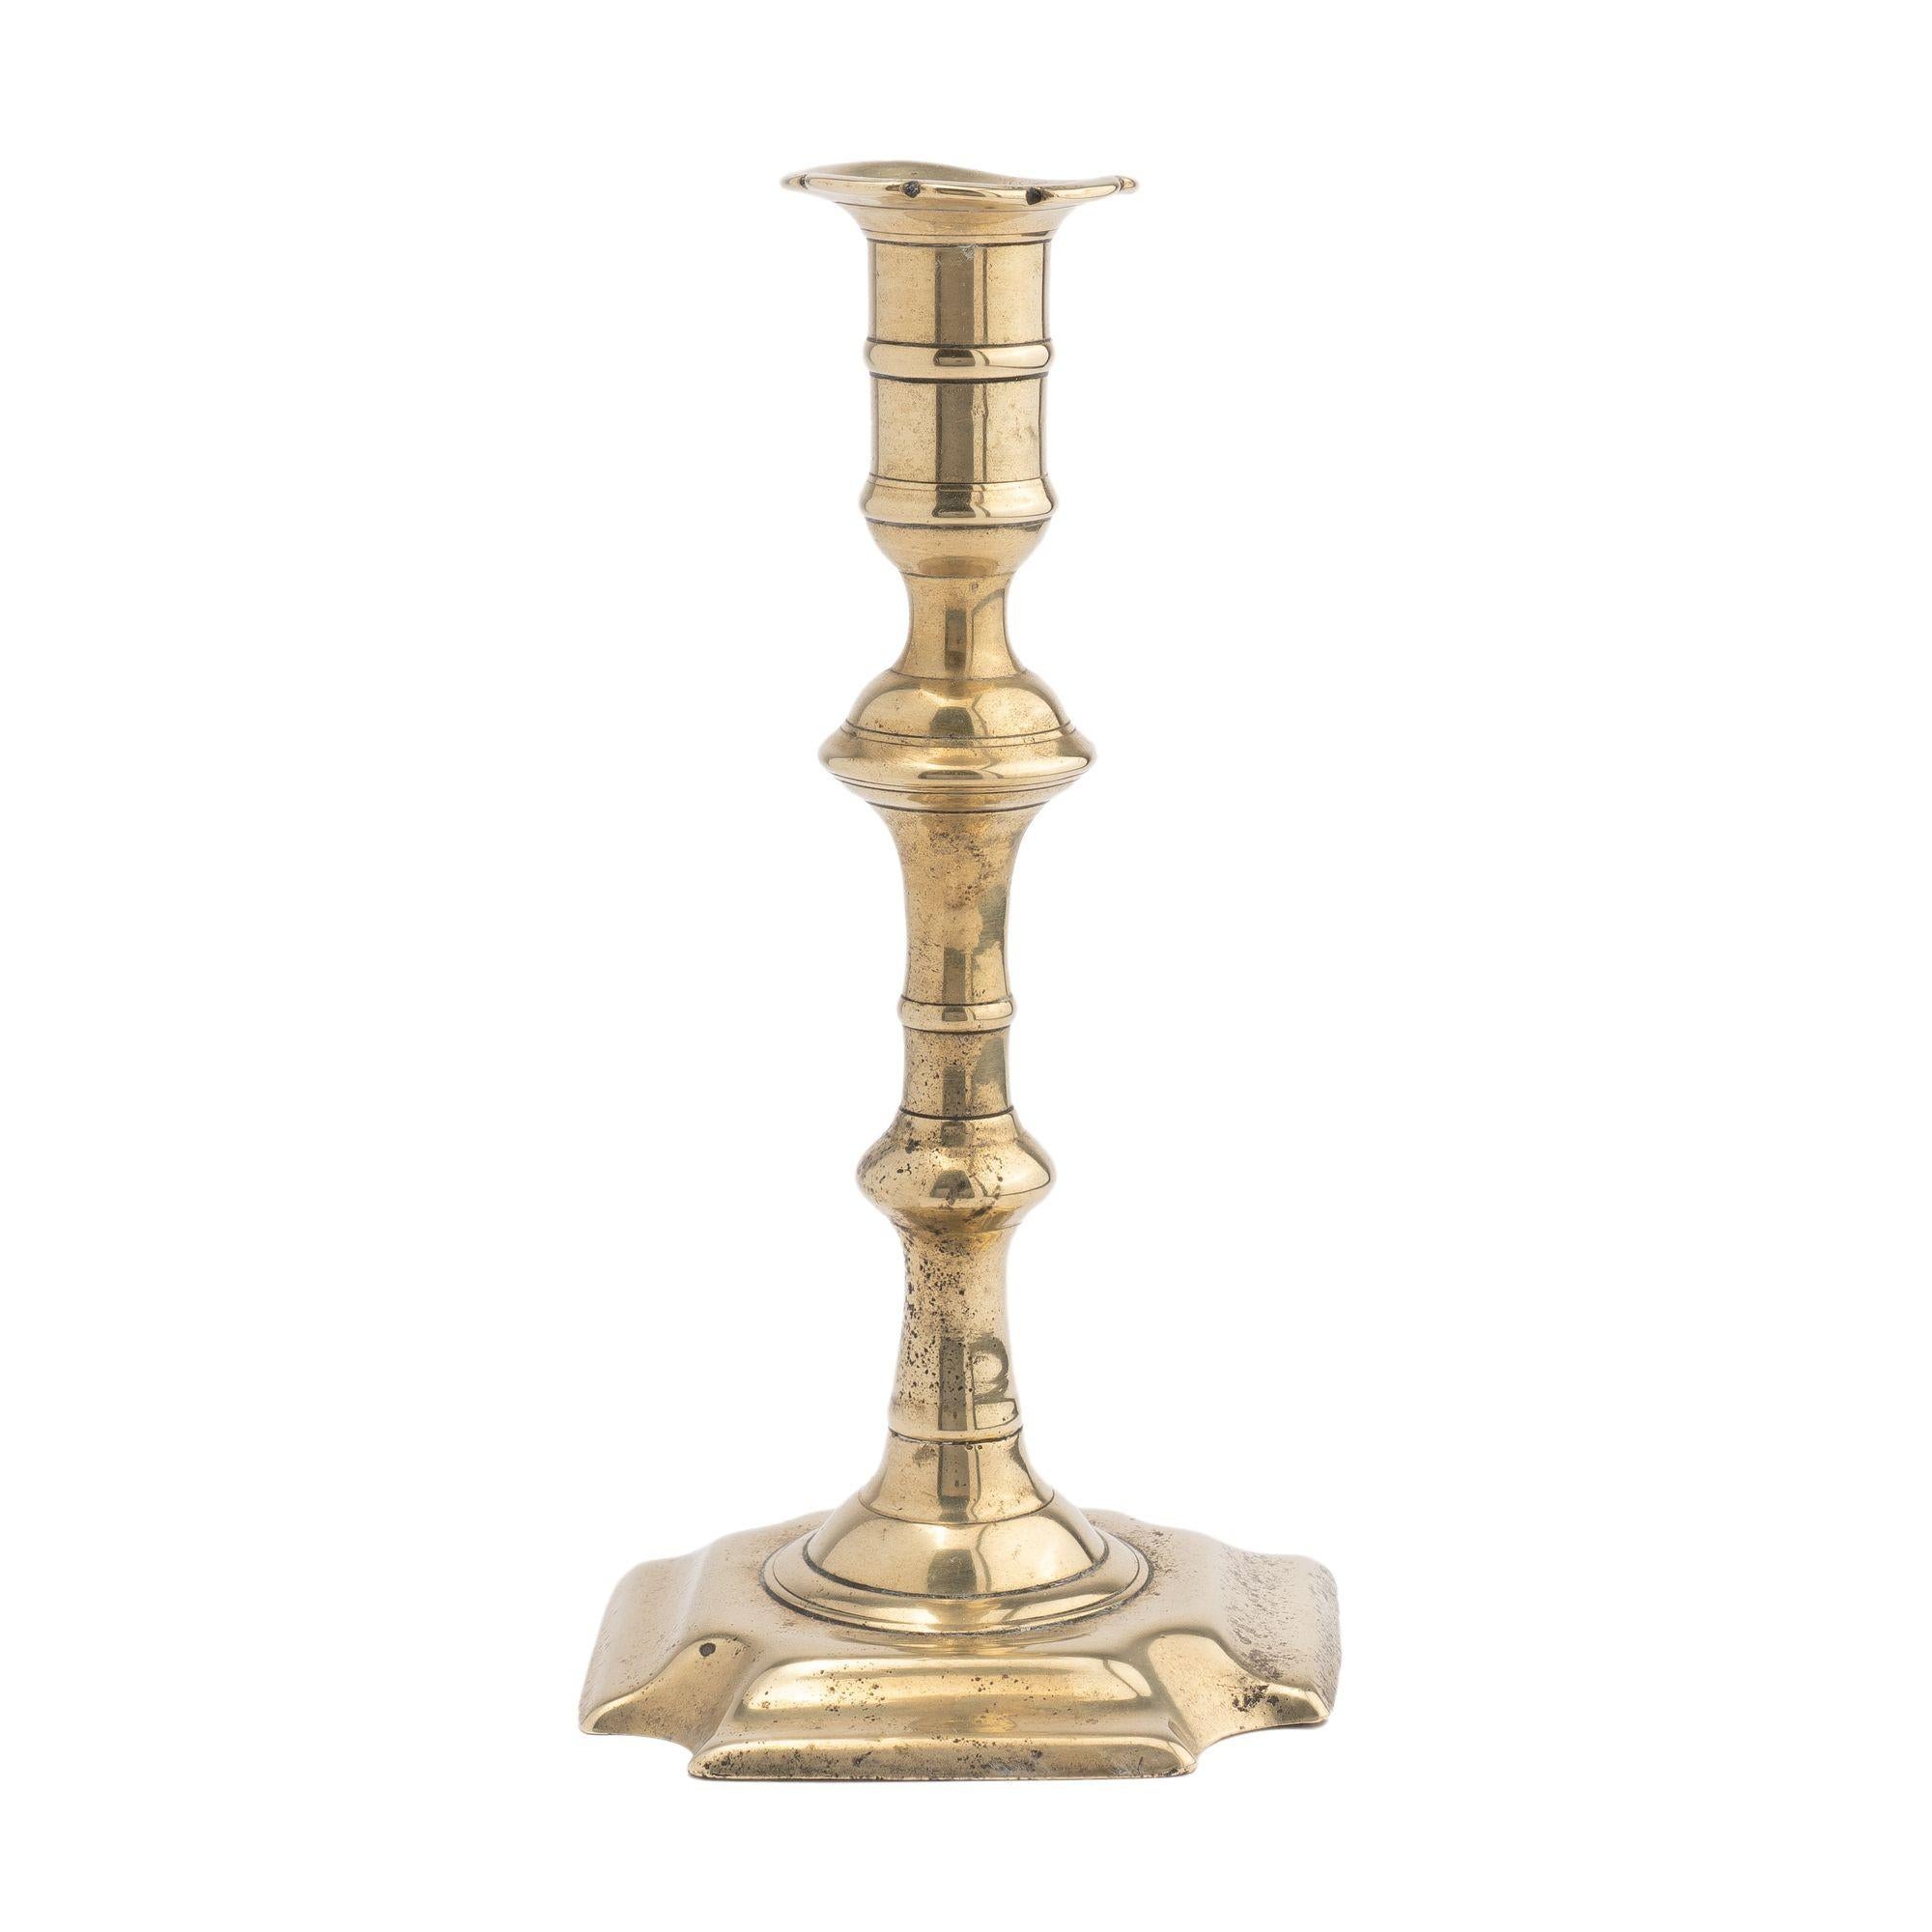 Core cast brass Queen Anne baluster shaft candlestick. The candle shaft, candle cup, and scolloped edge bobeshe is peened to a shallow square base with cove cut corners.

Birmingham, England, circa 1740-60.